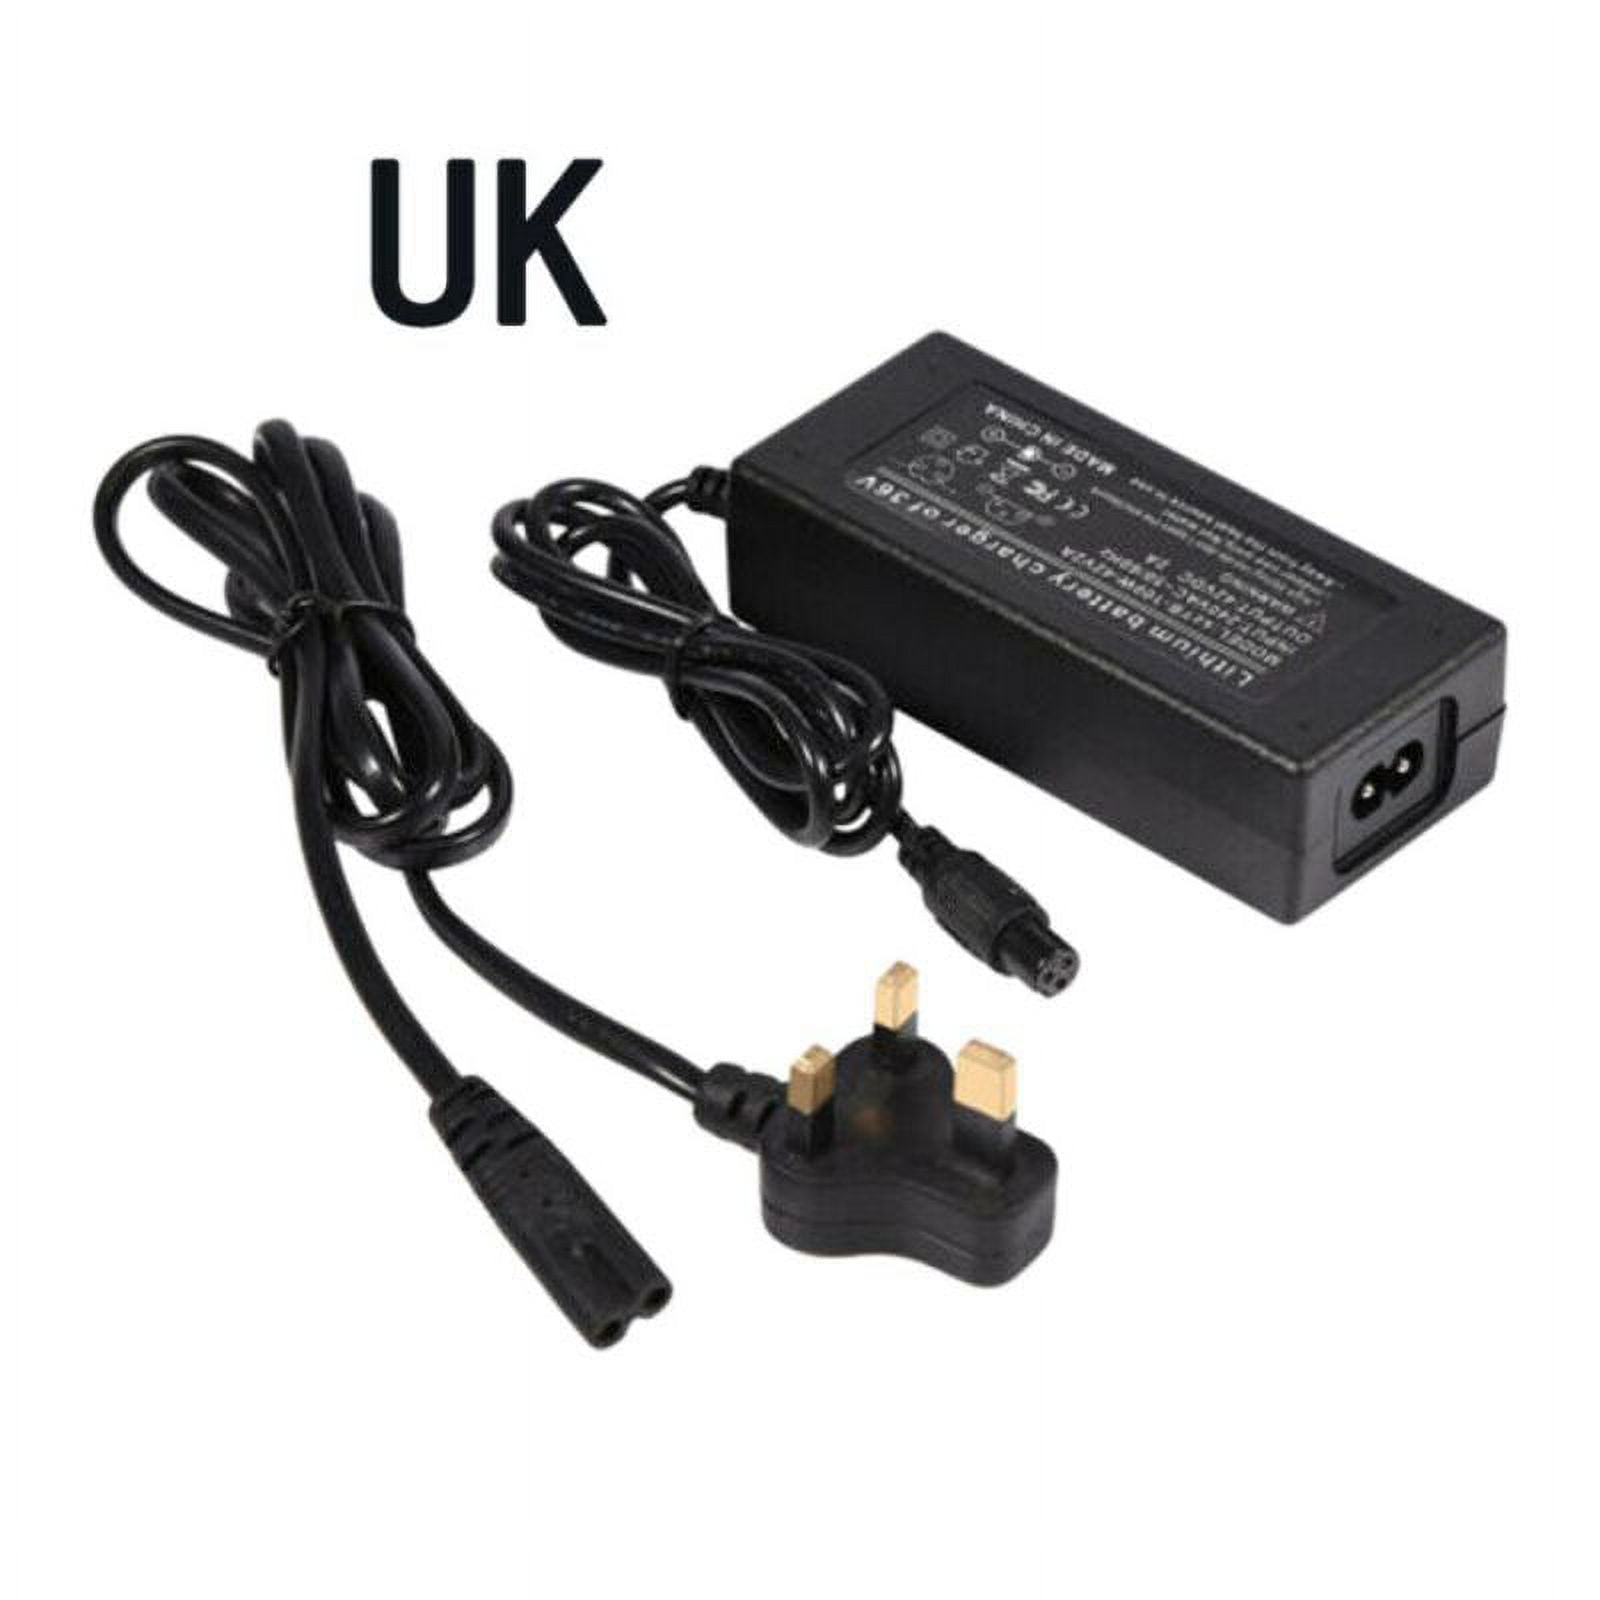 Professional DC 29.4V 2A Power Adapter Charger For Self Balancing